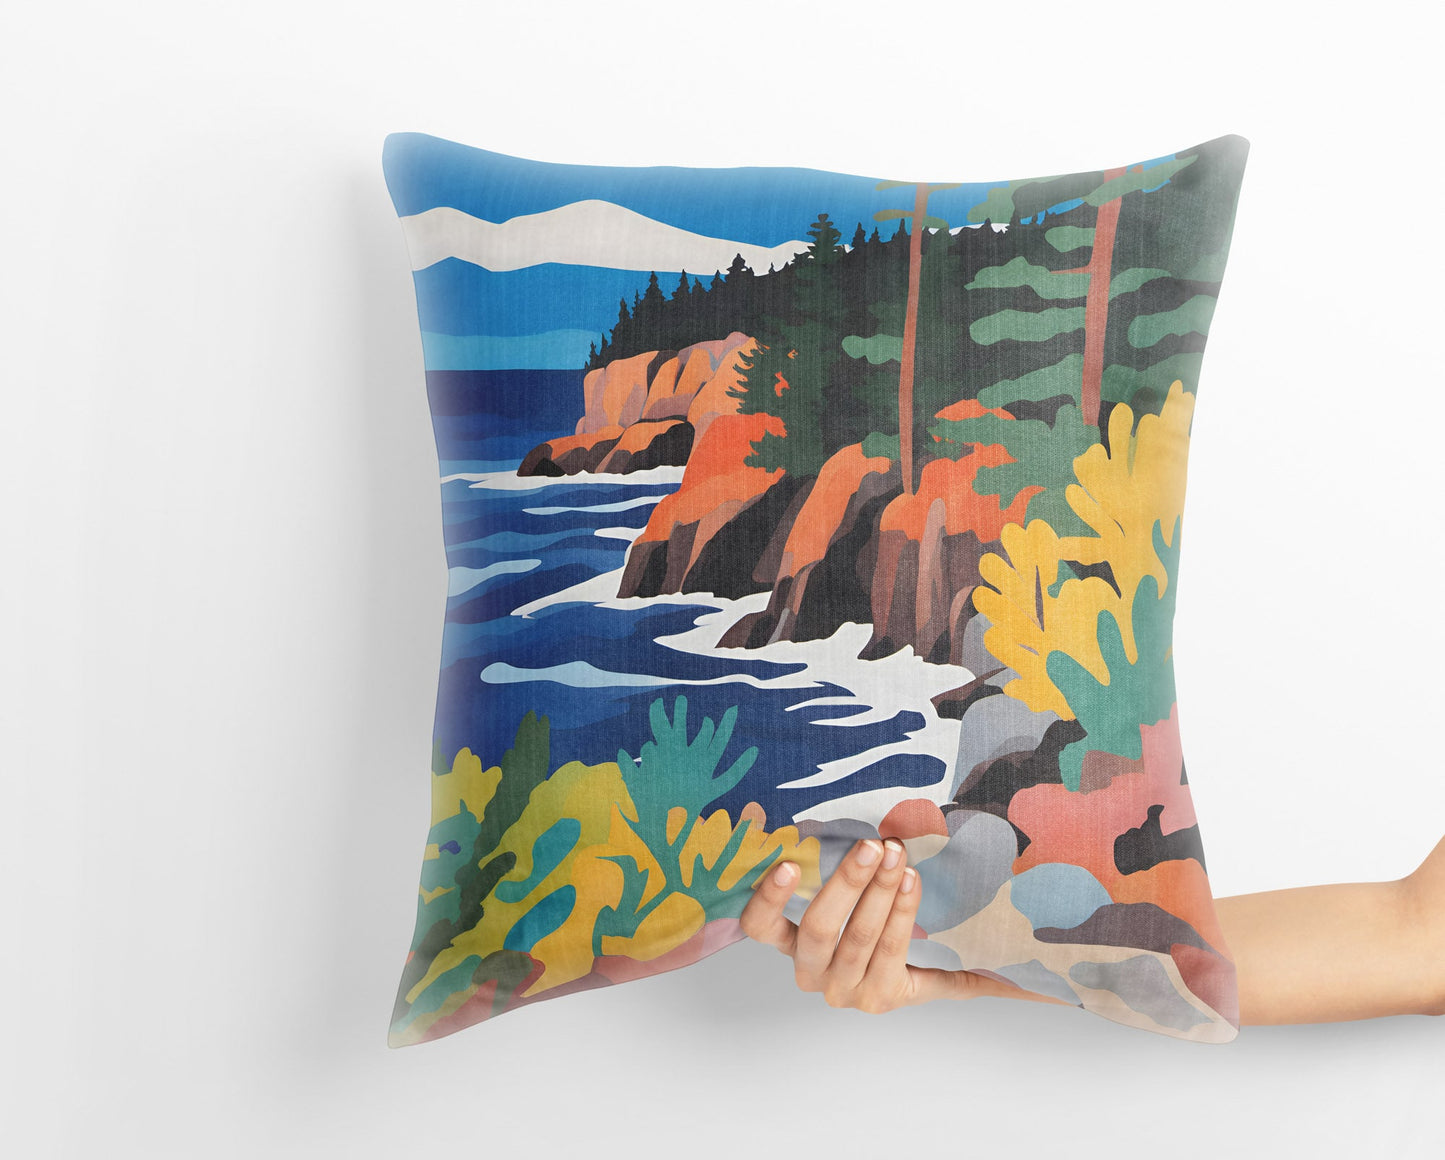 Acadia National Park Throw Pillow, Usa Travel Pillow, Art Pillow, Colorful Pillow Case, Watercolor Pillow Cases, Pillow Covers 20X20